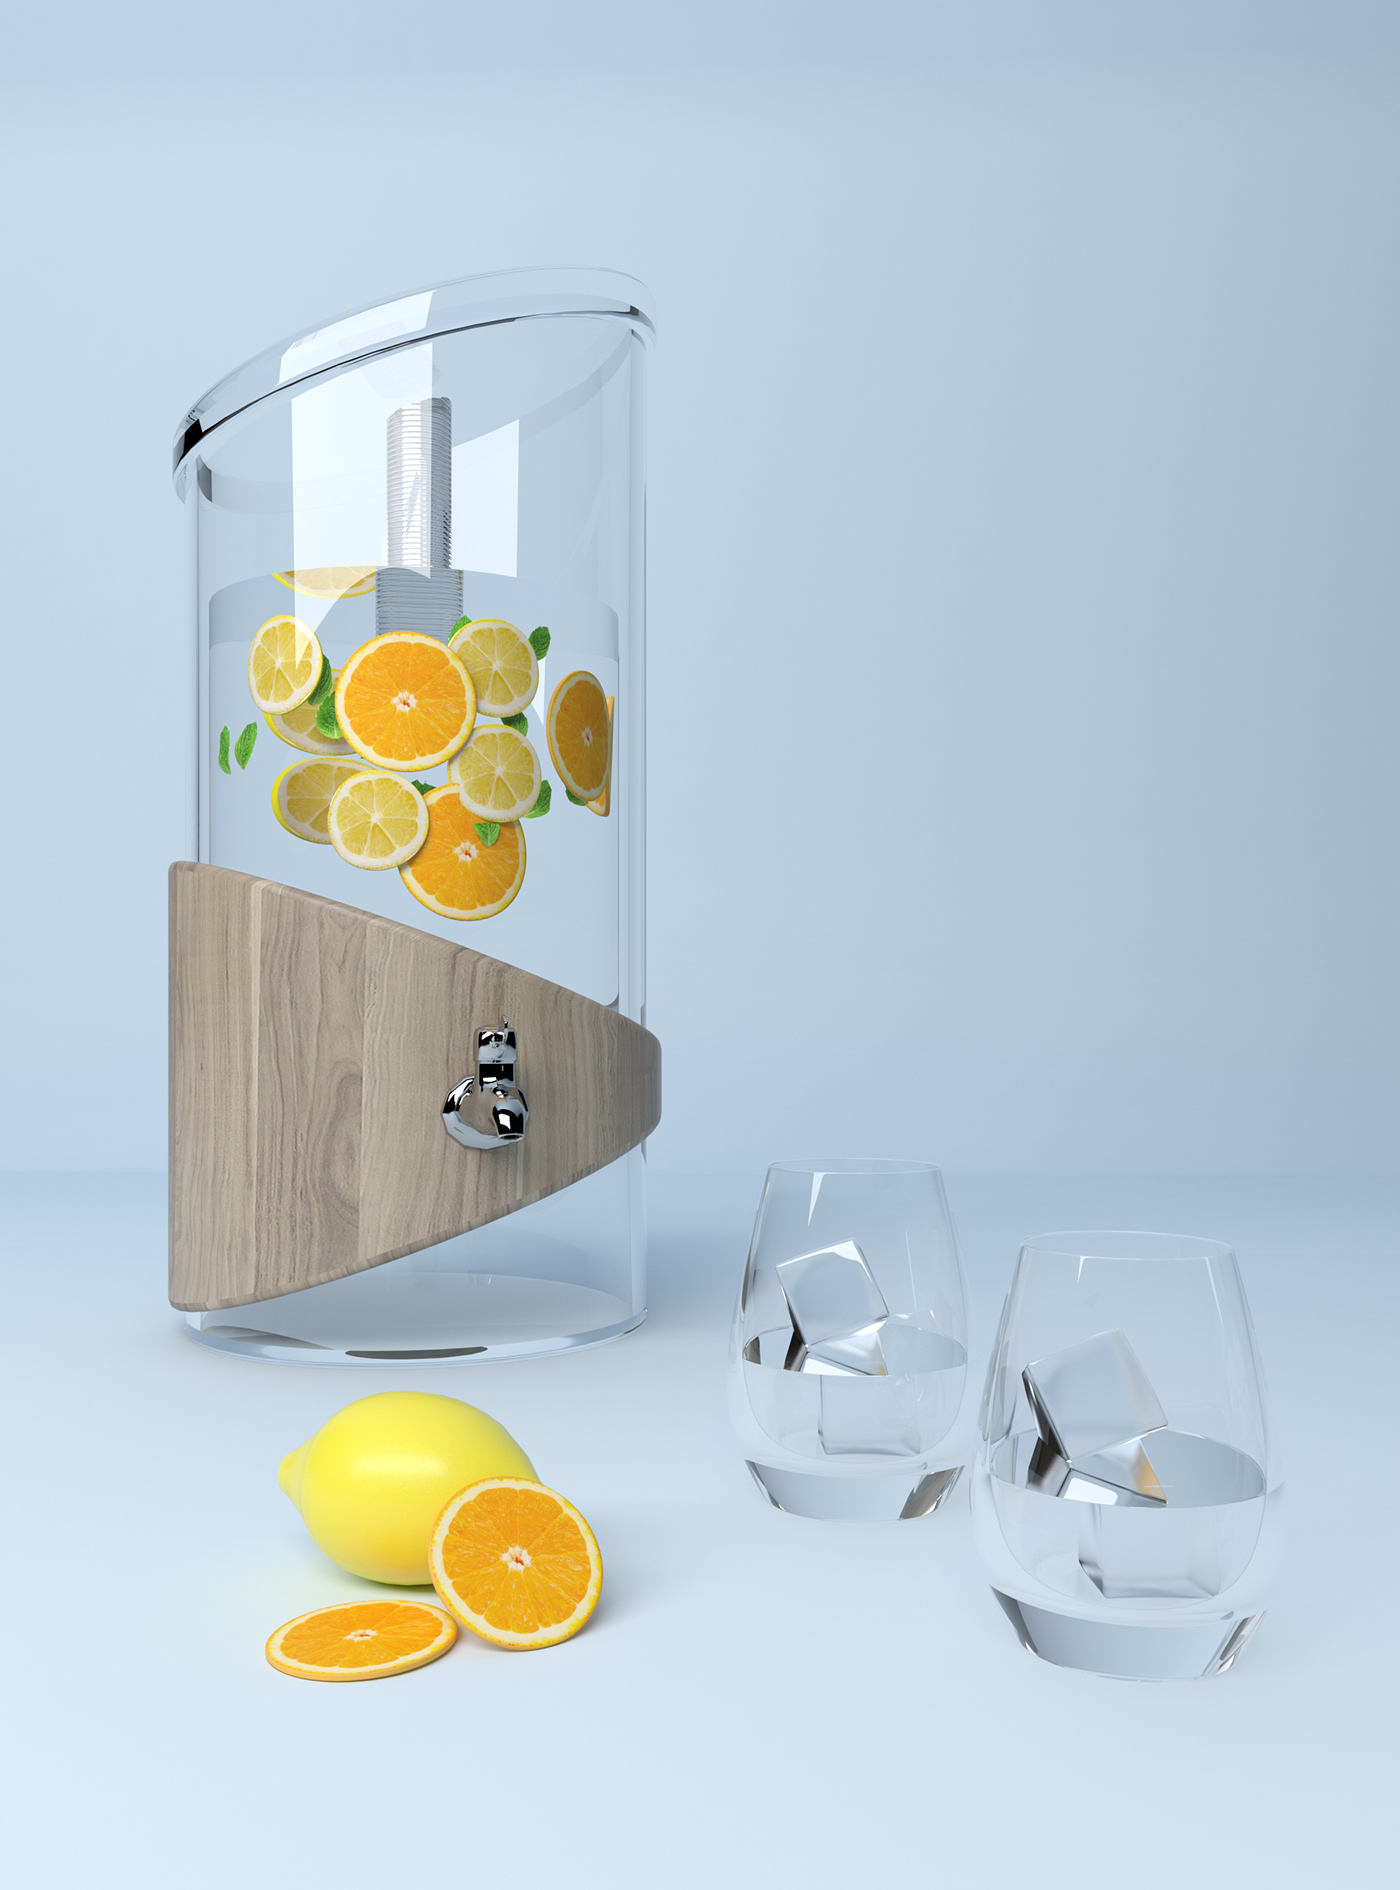 product design  modeling concept design 3ds max Render visualization kitchen vray render homeproducts